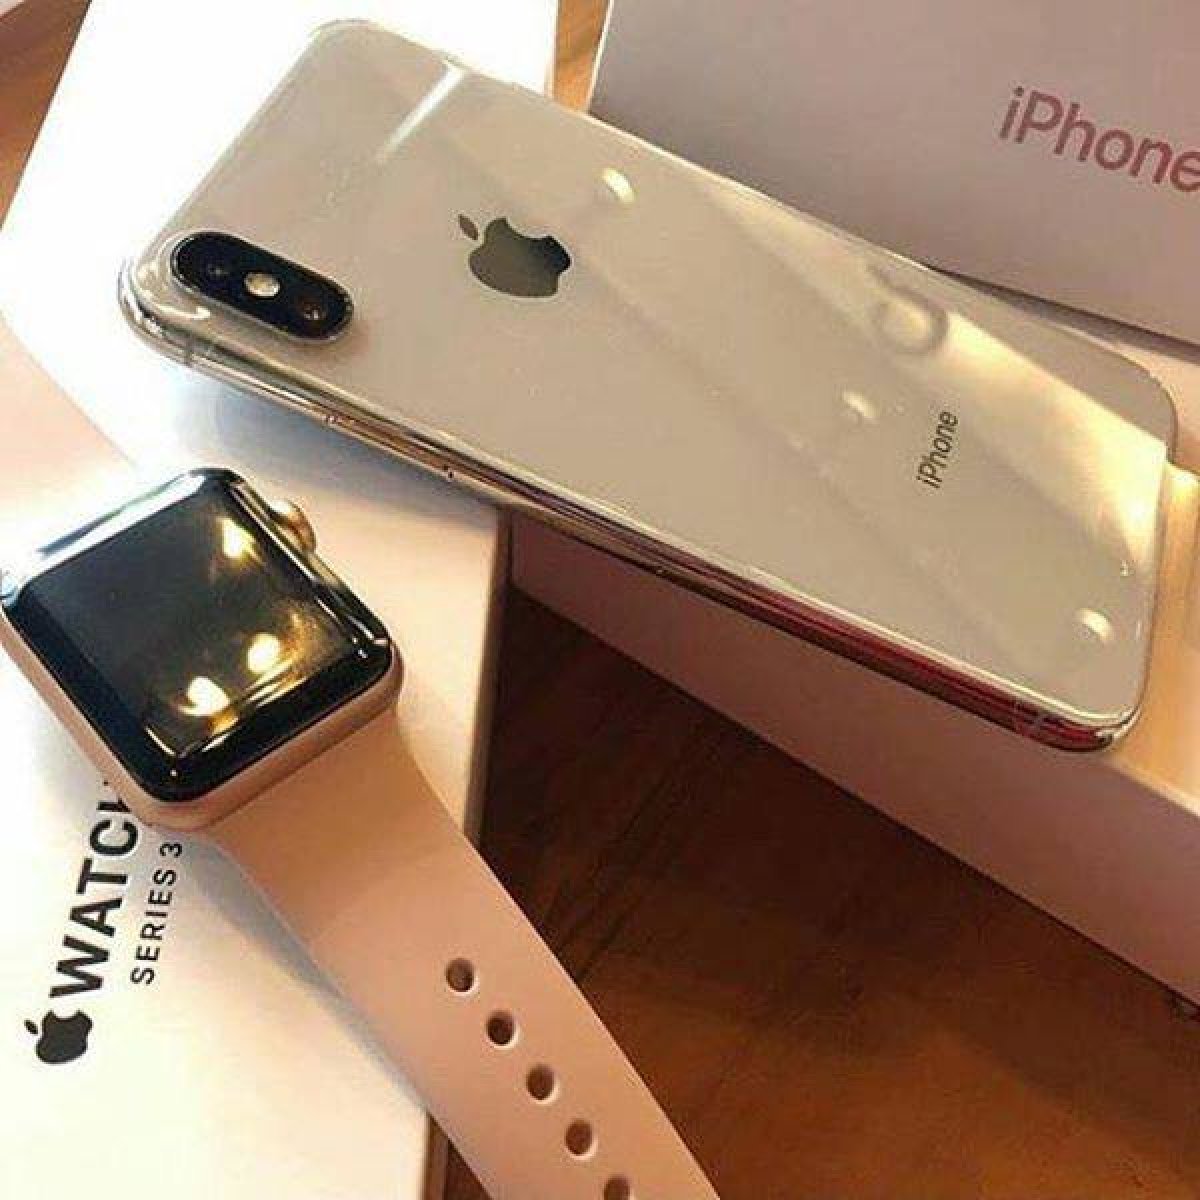 New Apple IPhone XS Max 512GB for sale in Dallas, Texas Kingston St Andrew - Phones